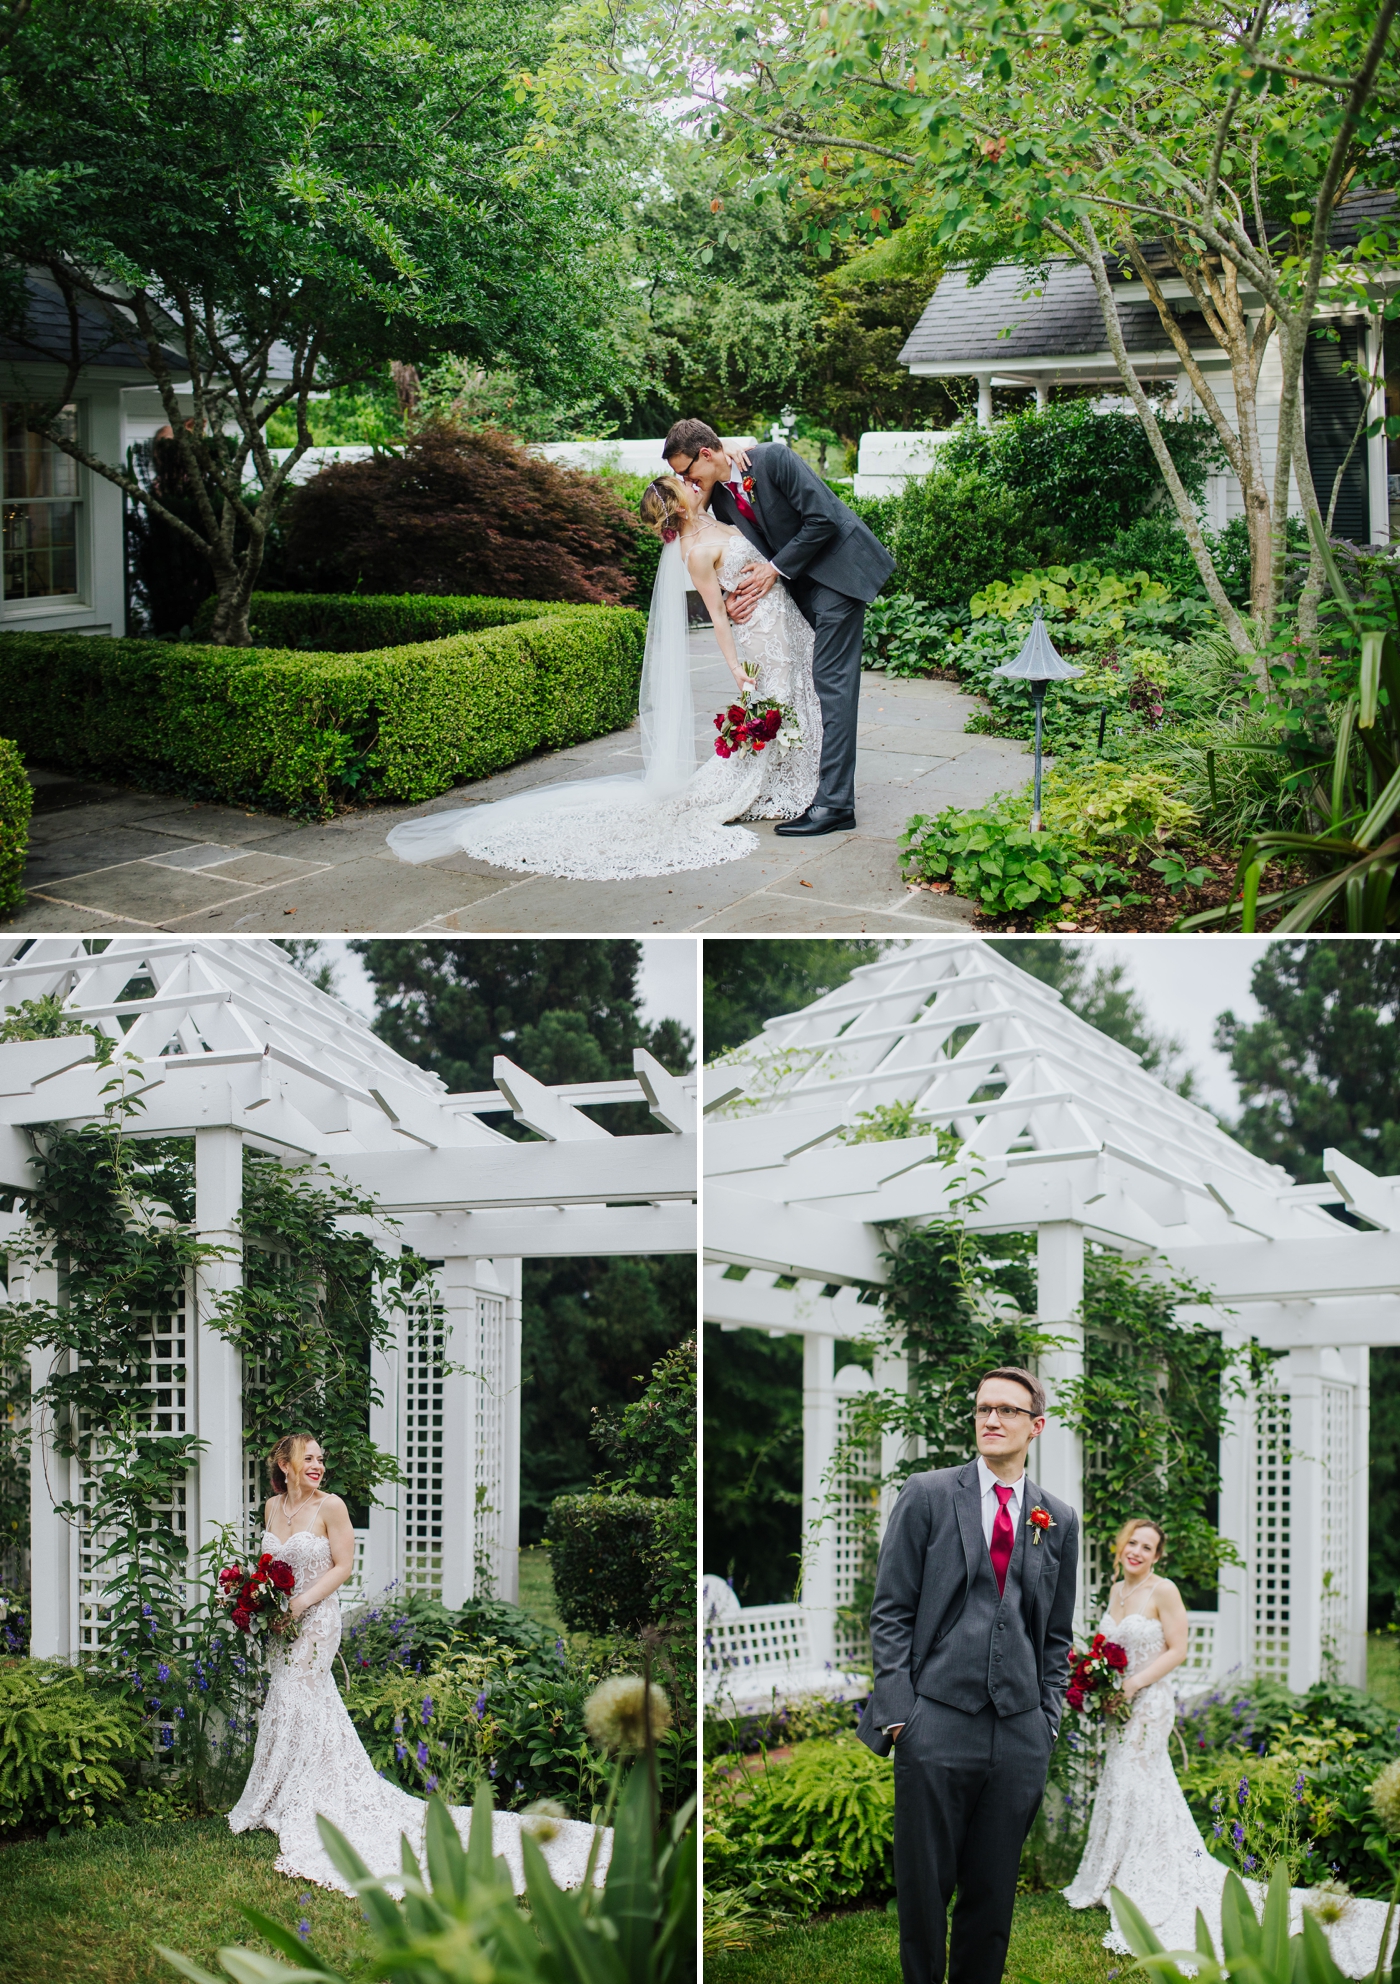 Alyssa and Chris’s Summer wedding in Chapel Hill at Fearrington Village | Izzy and Co.